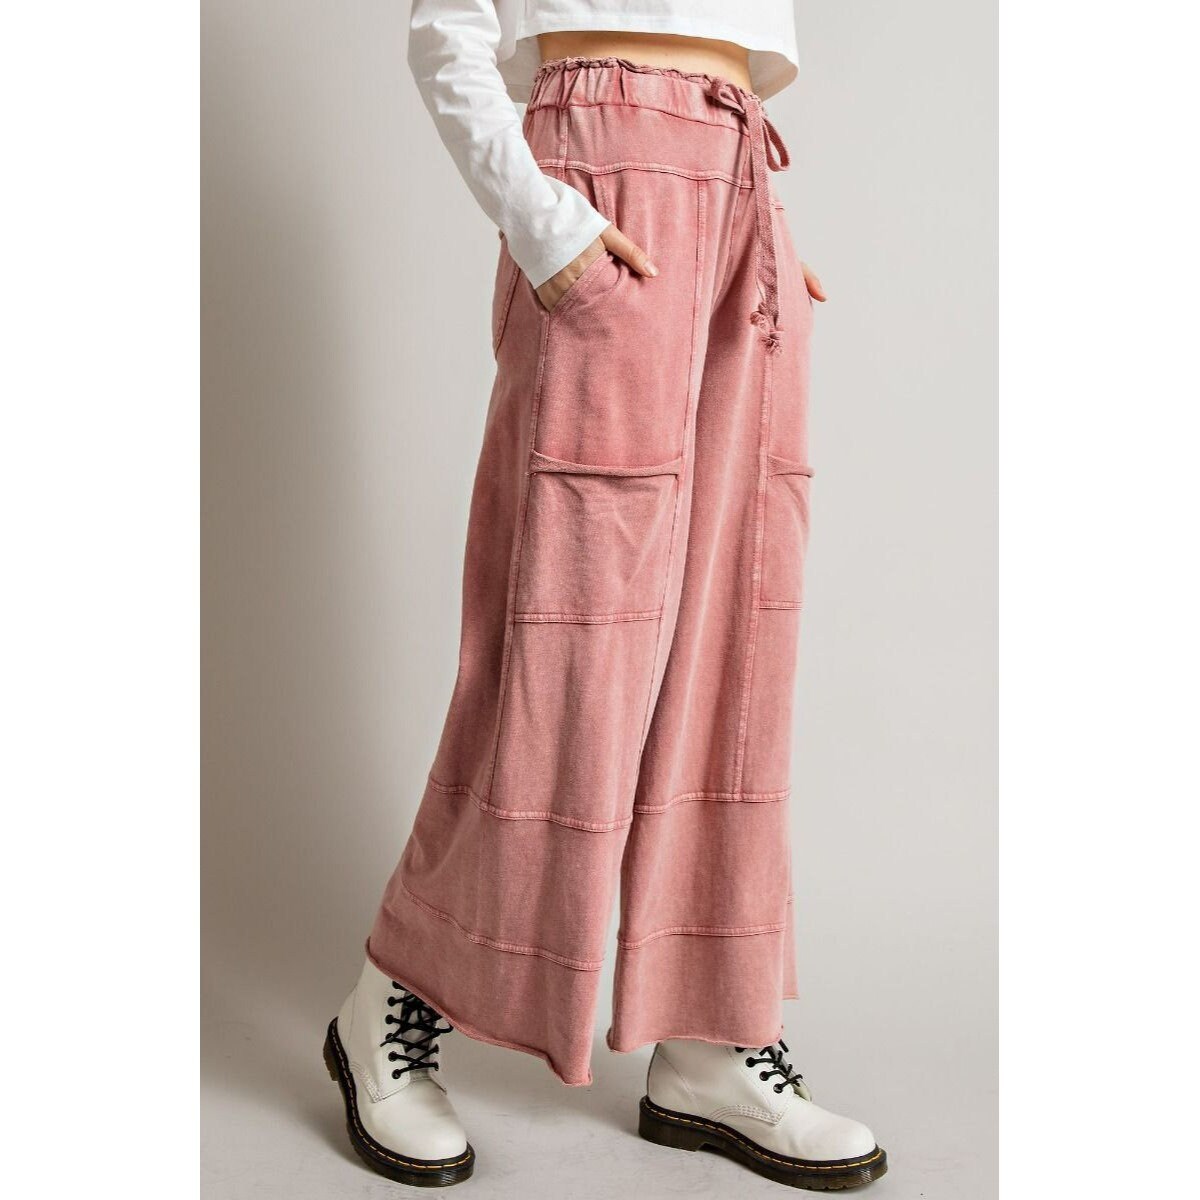 Easel Lazy Days Mineral Washed Wide Leg Pants in Mauve EB41308 - Etsy